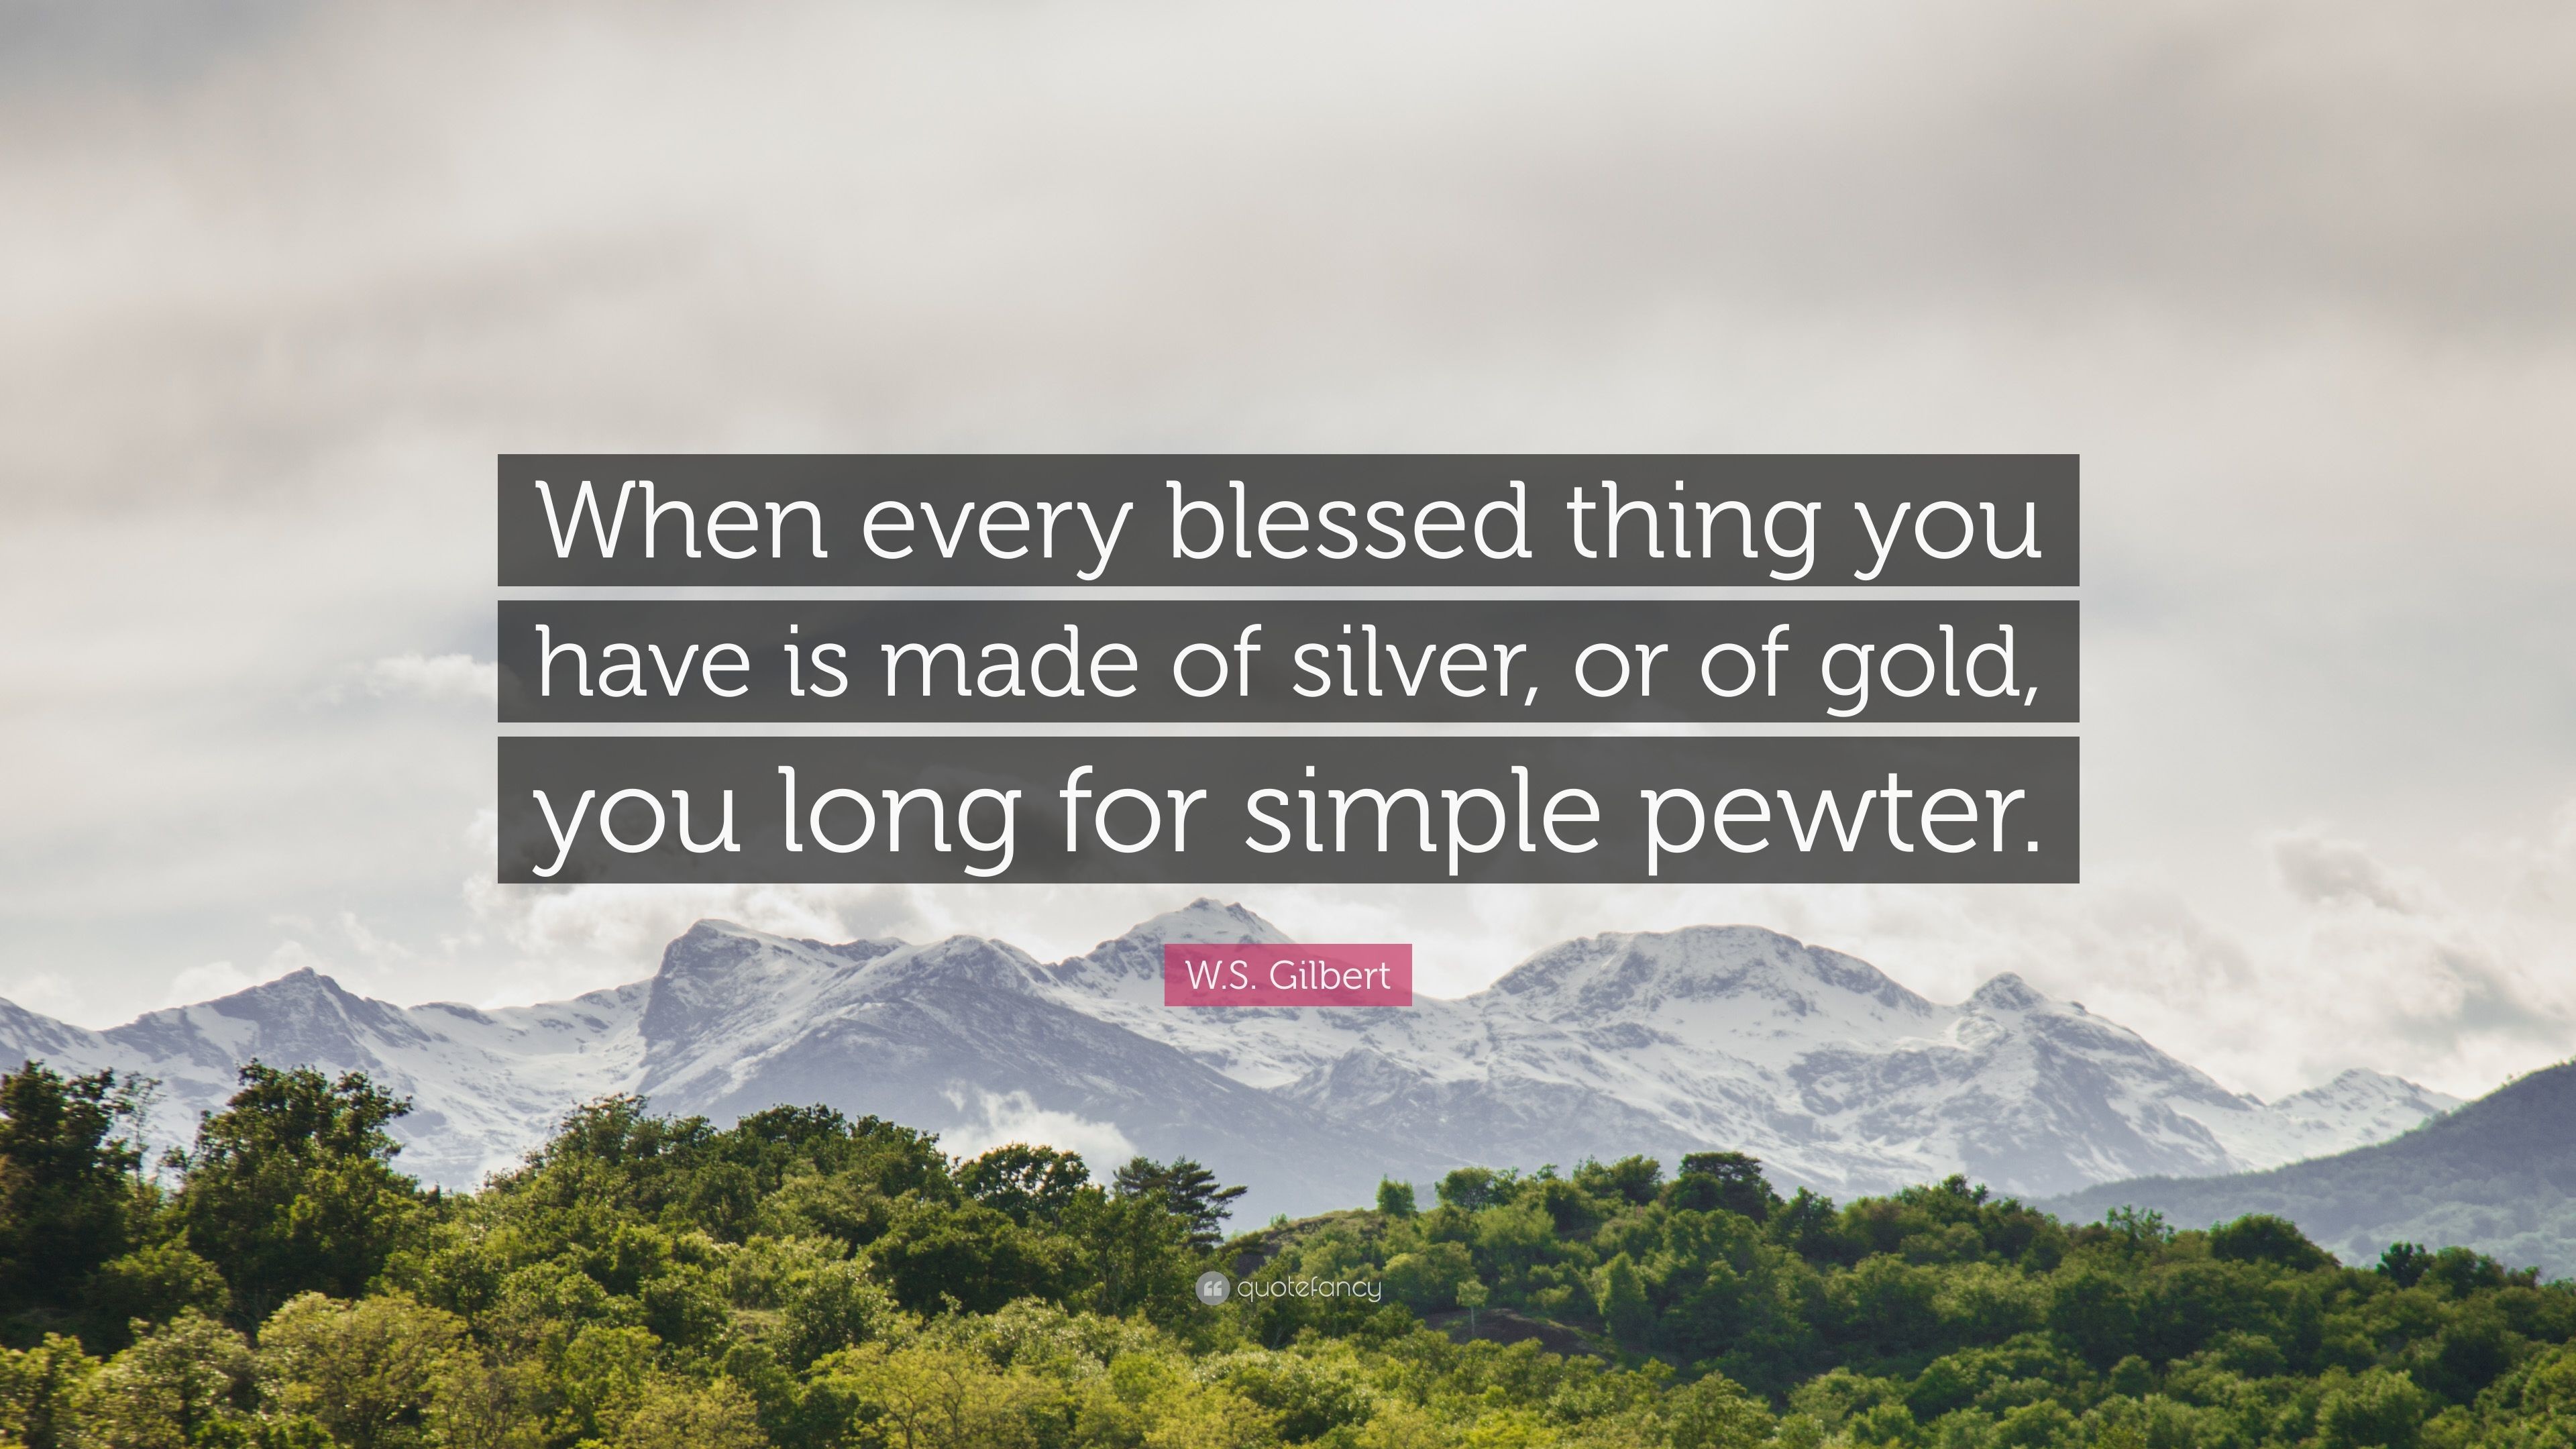 3840x2160 W.S. Gilbert Quote: “When every blessed thing you have is made of silver,